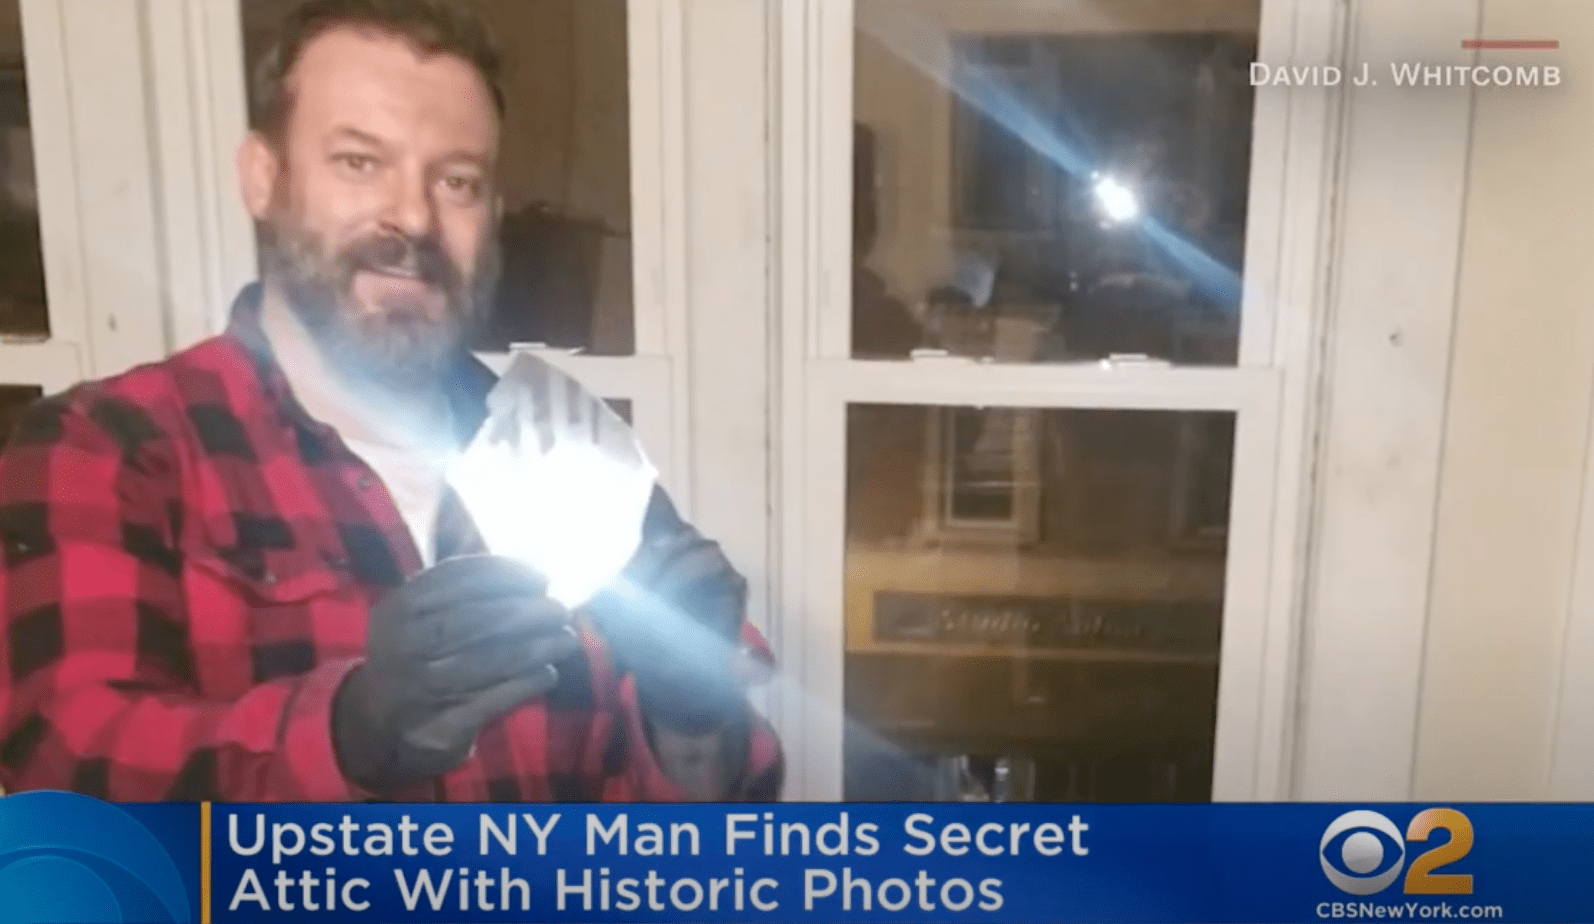 A man who discovered hidden treasures in his attic holds up a glass negative | Photo: Youtube/CBS New York